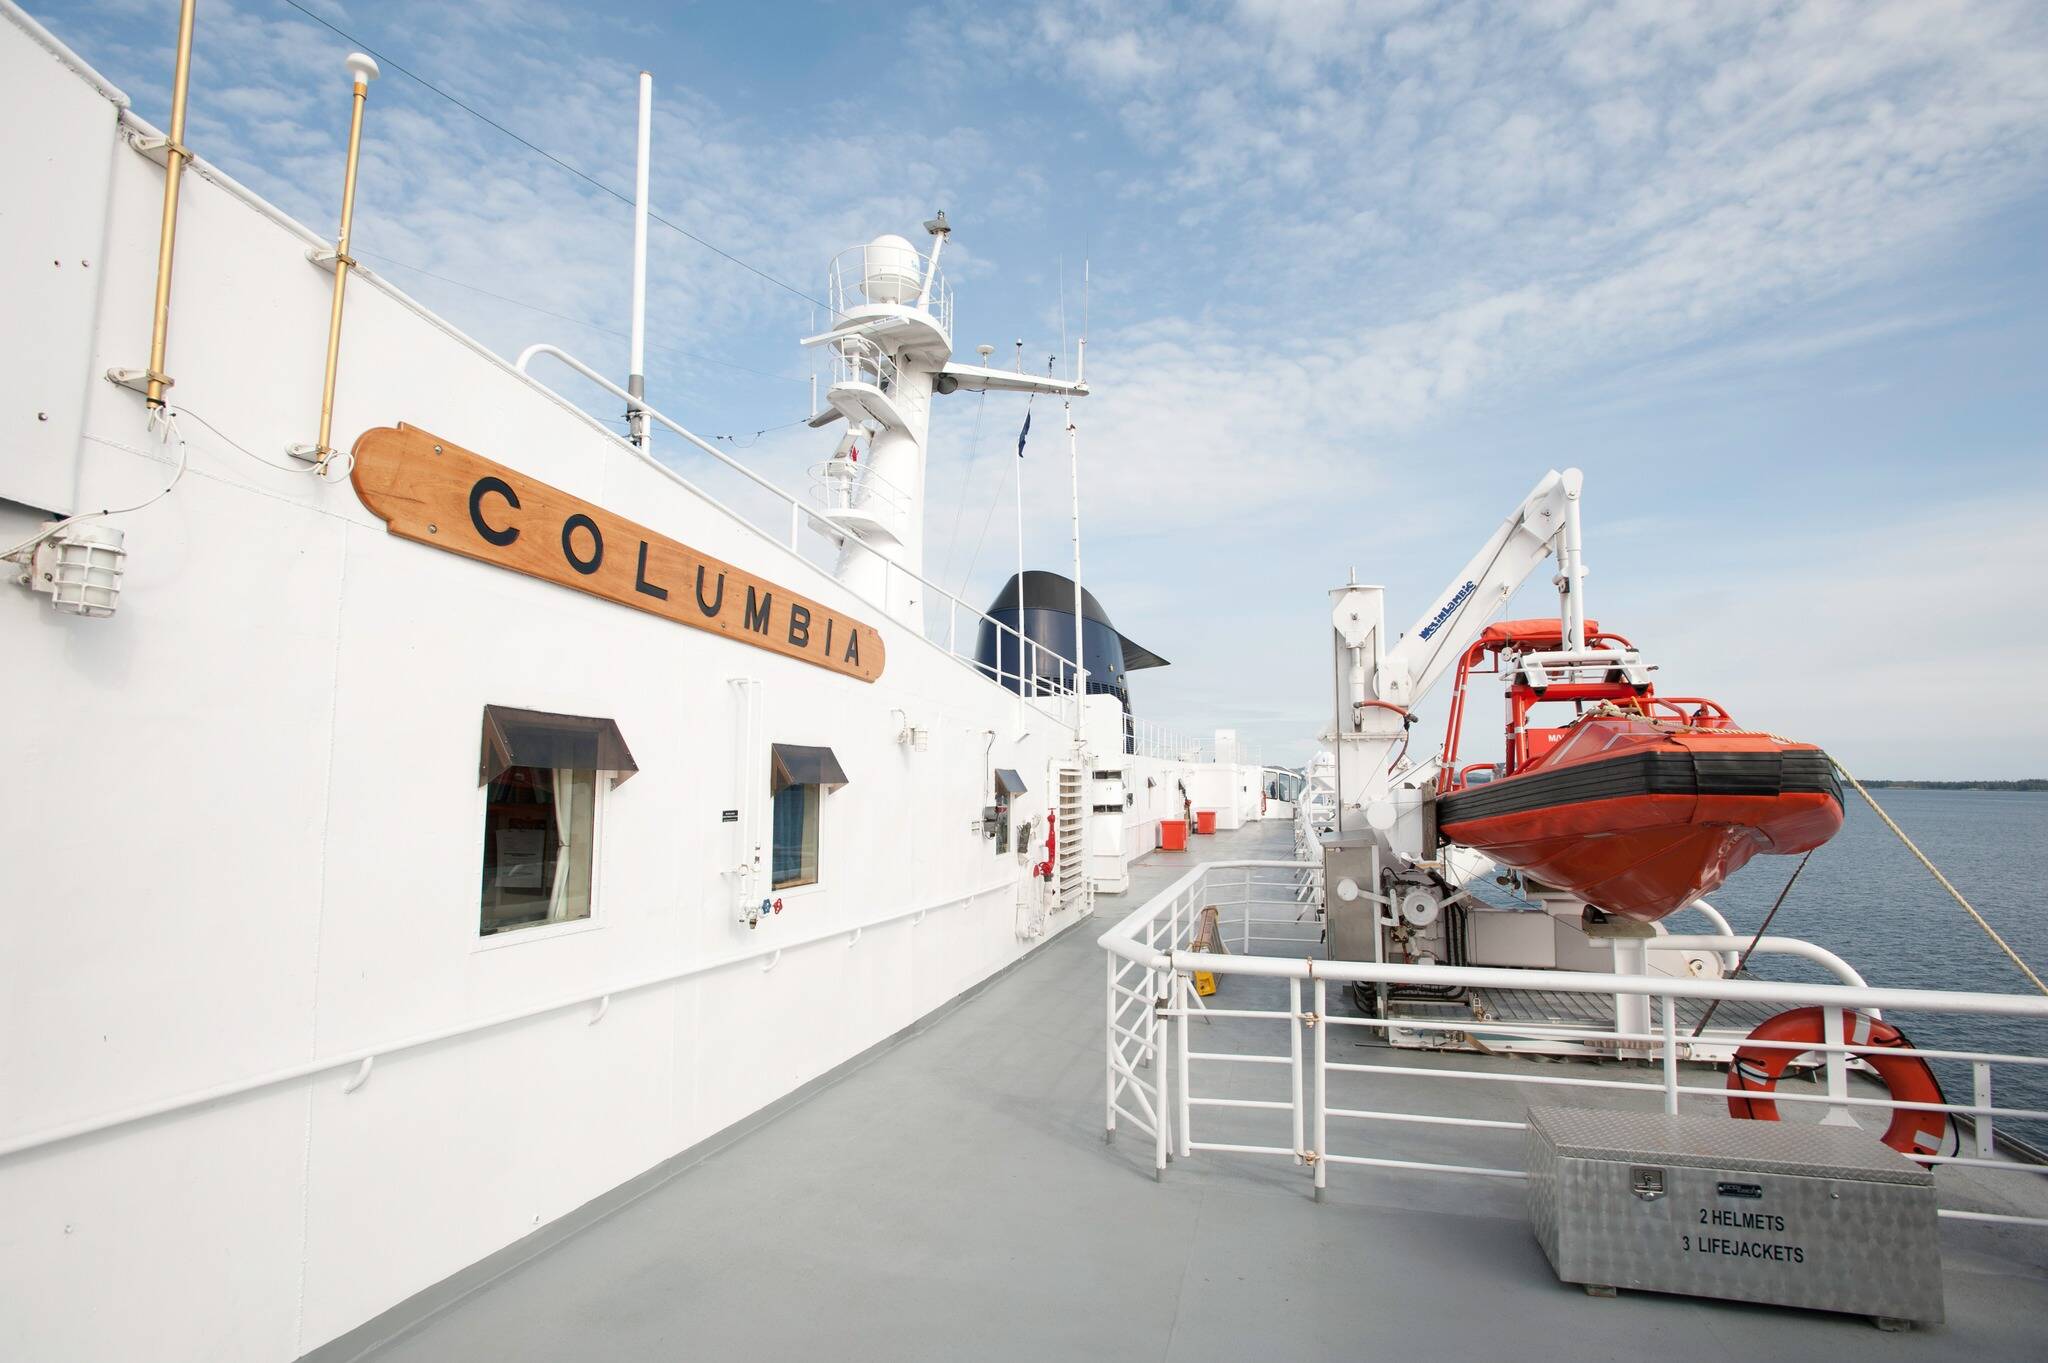 A lifeboat on the deck of the Columbia ferry in May. (Photo courtesy of the Alaska Marine Highway System)